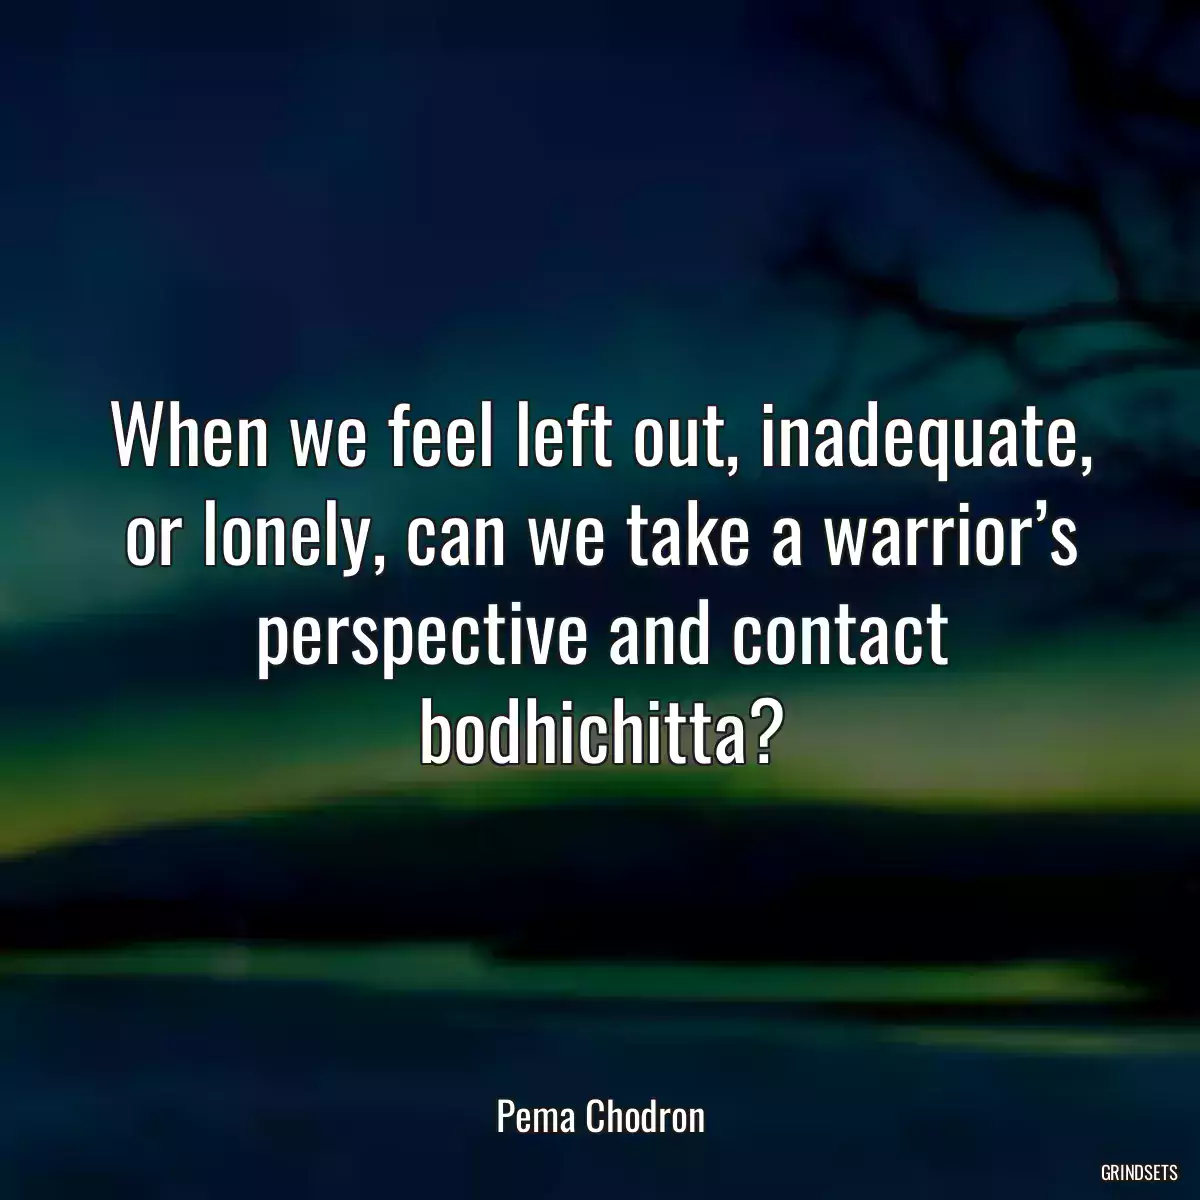 When we feel left out, inadequate, or lonely, can we take a warrior’s perspective and contact bodhichitta?